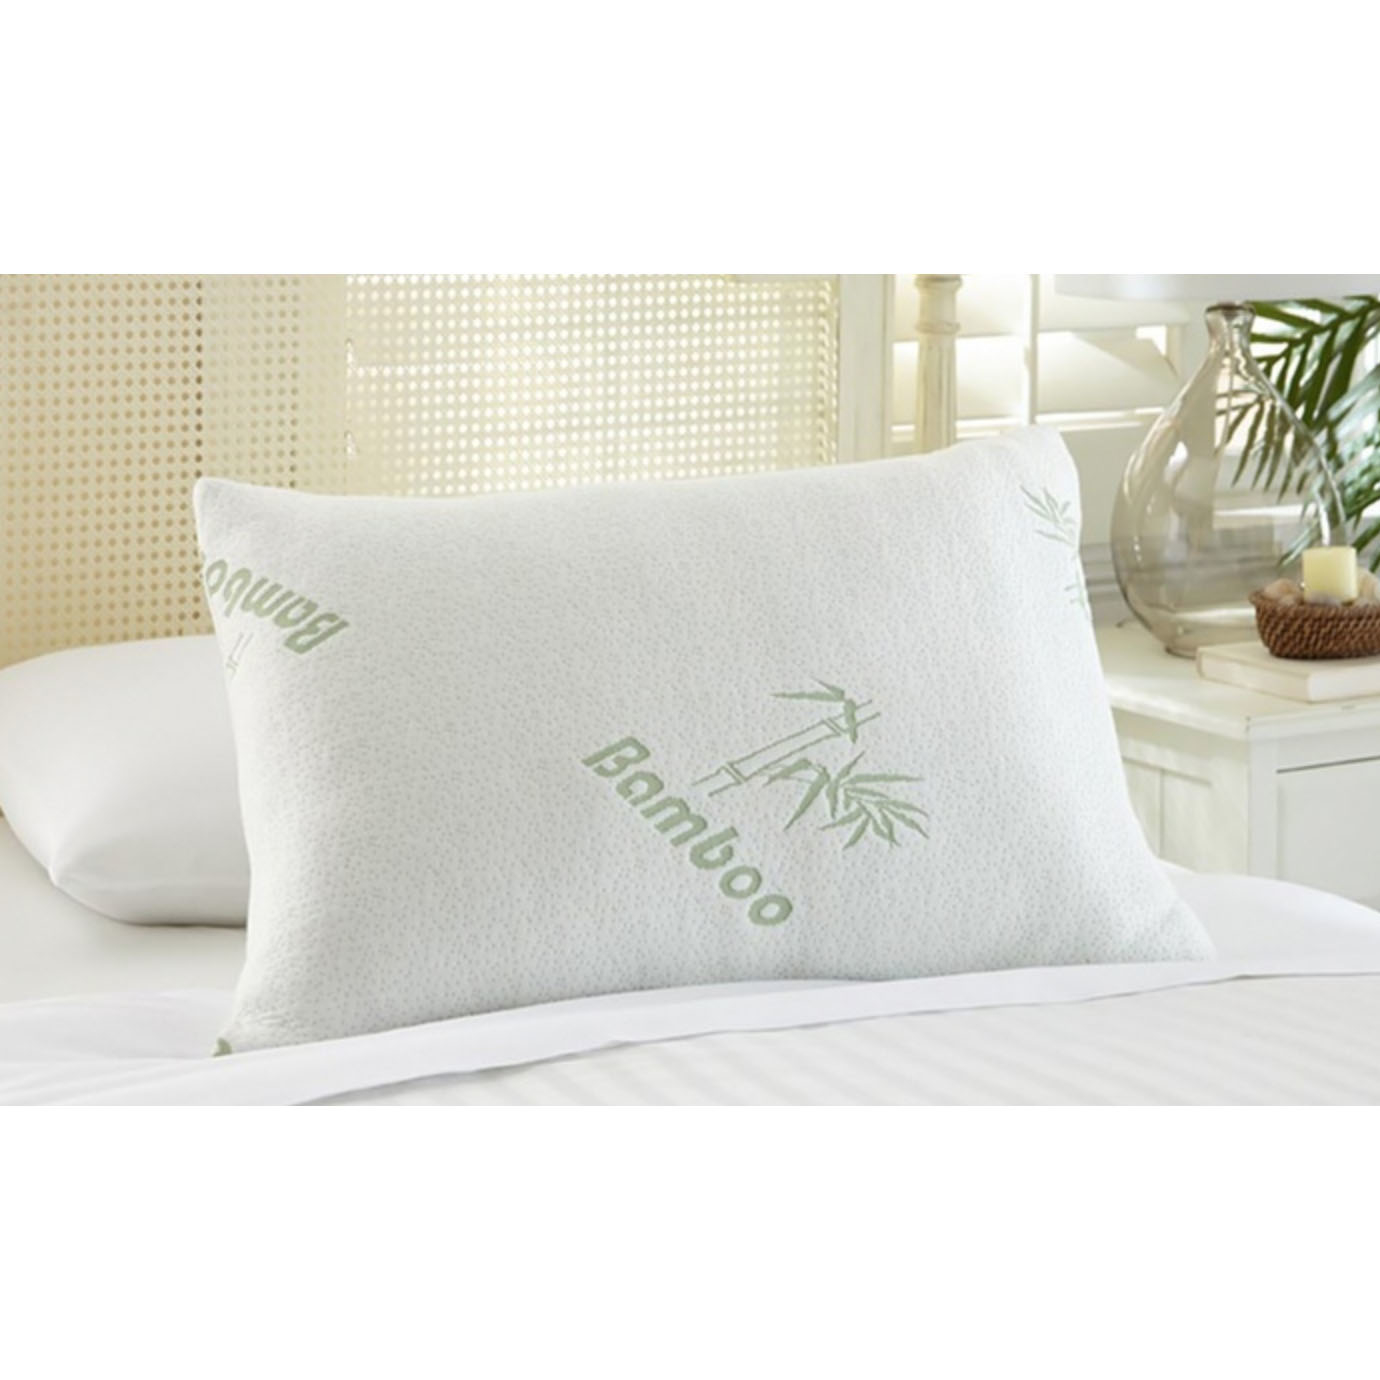 Set Of 2 Shredded Memory Foam Pillow, Removable Cover W/ Rayon From Bamboo Thick Best Bed Pillow